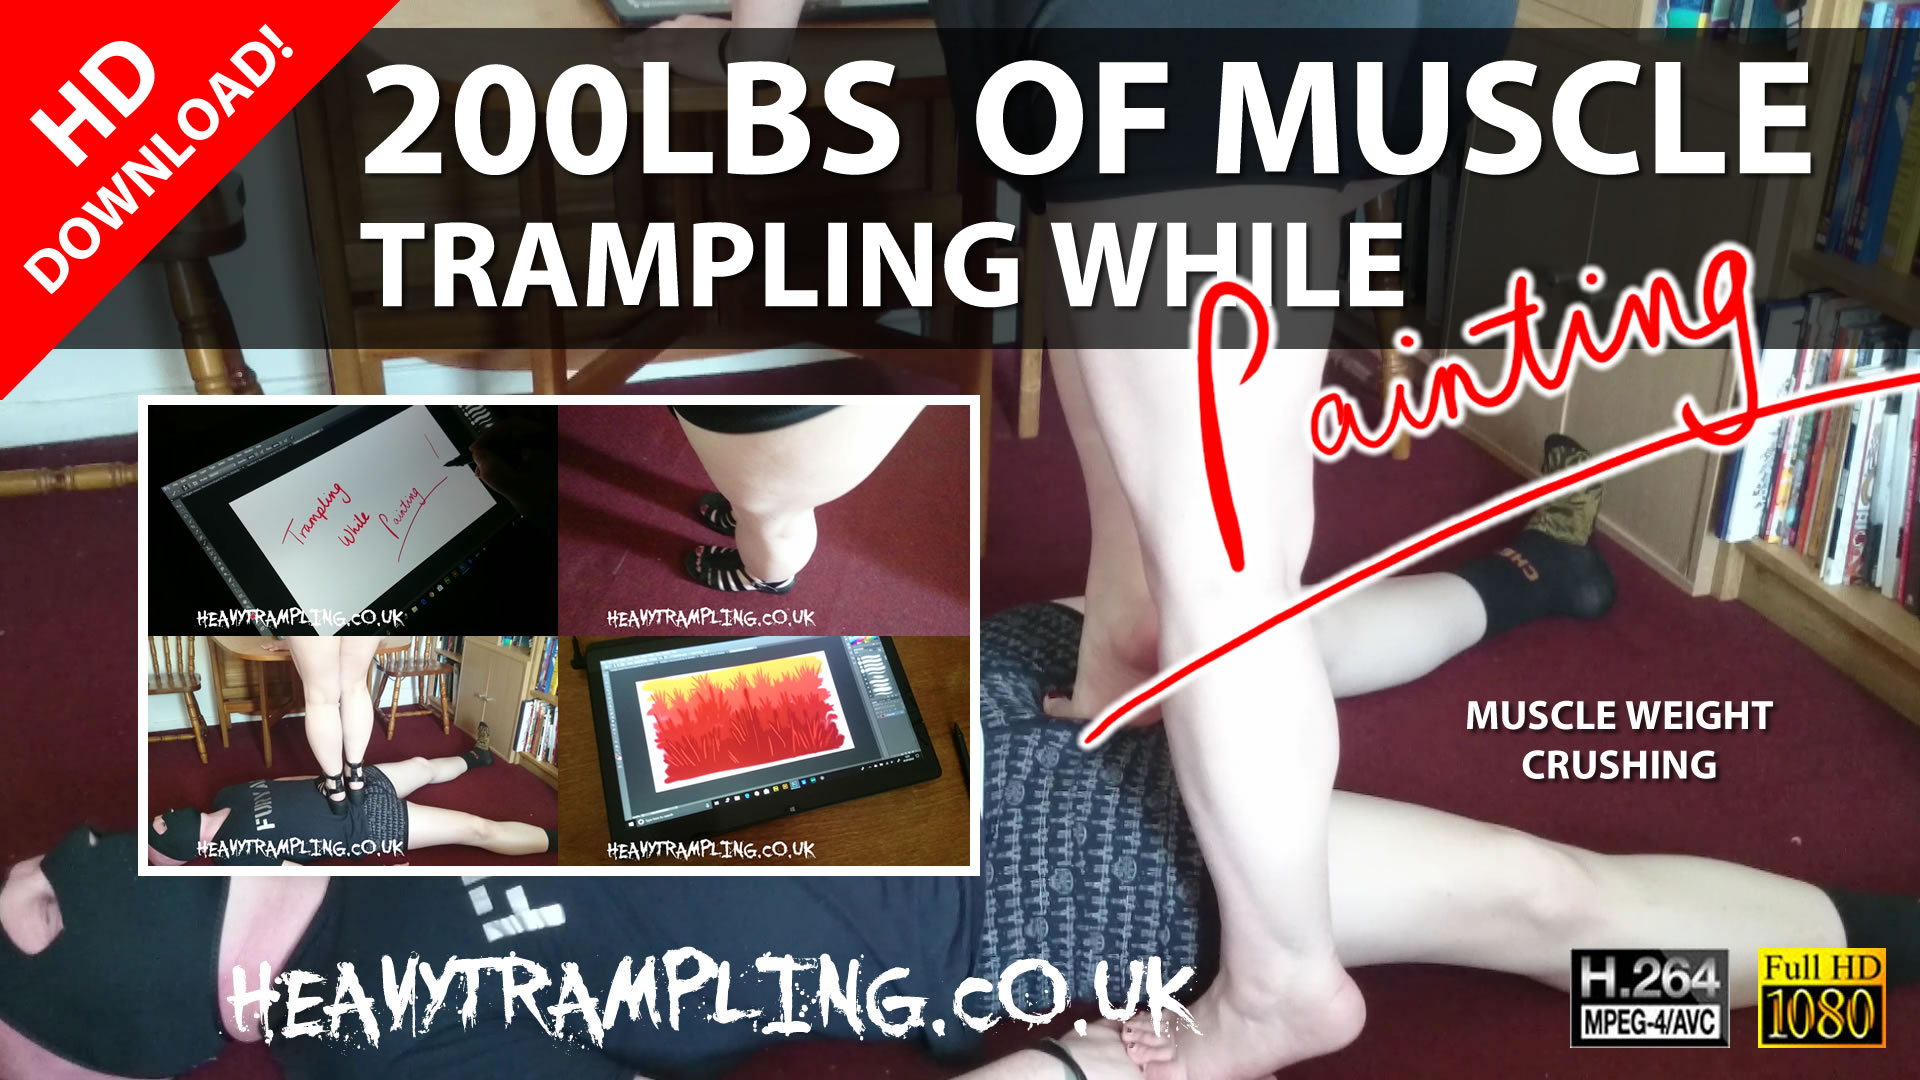 Trampling: 200lbs of Muscle Trampling while Painting!